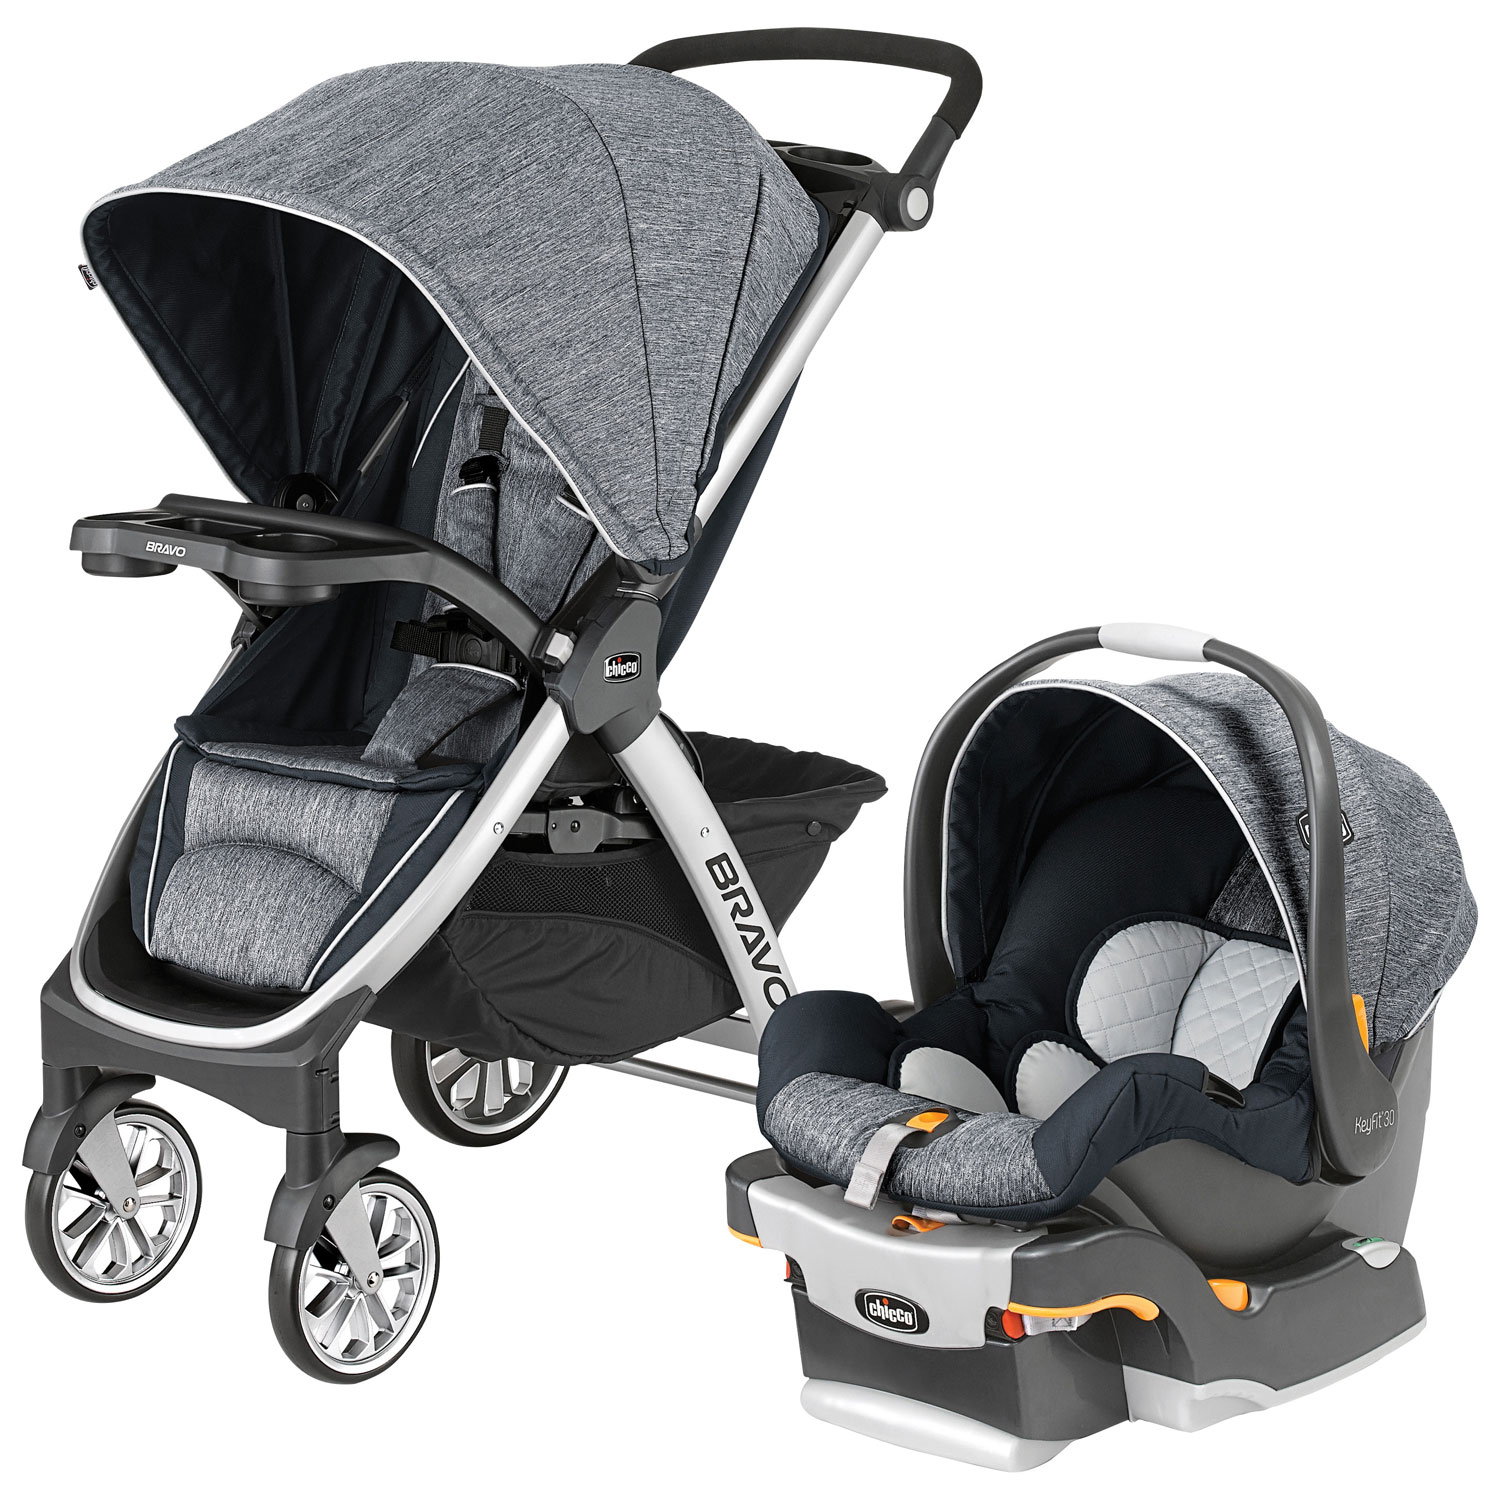 Chicco Bravo Stroller with KeyFit 30 Infant Car Seat - Indigo - Only at Best Buy